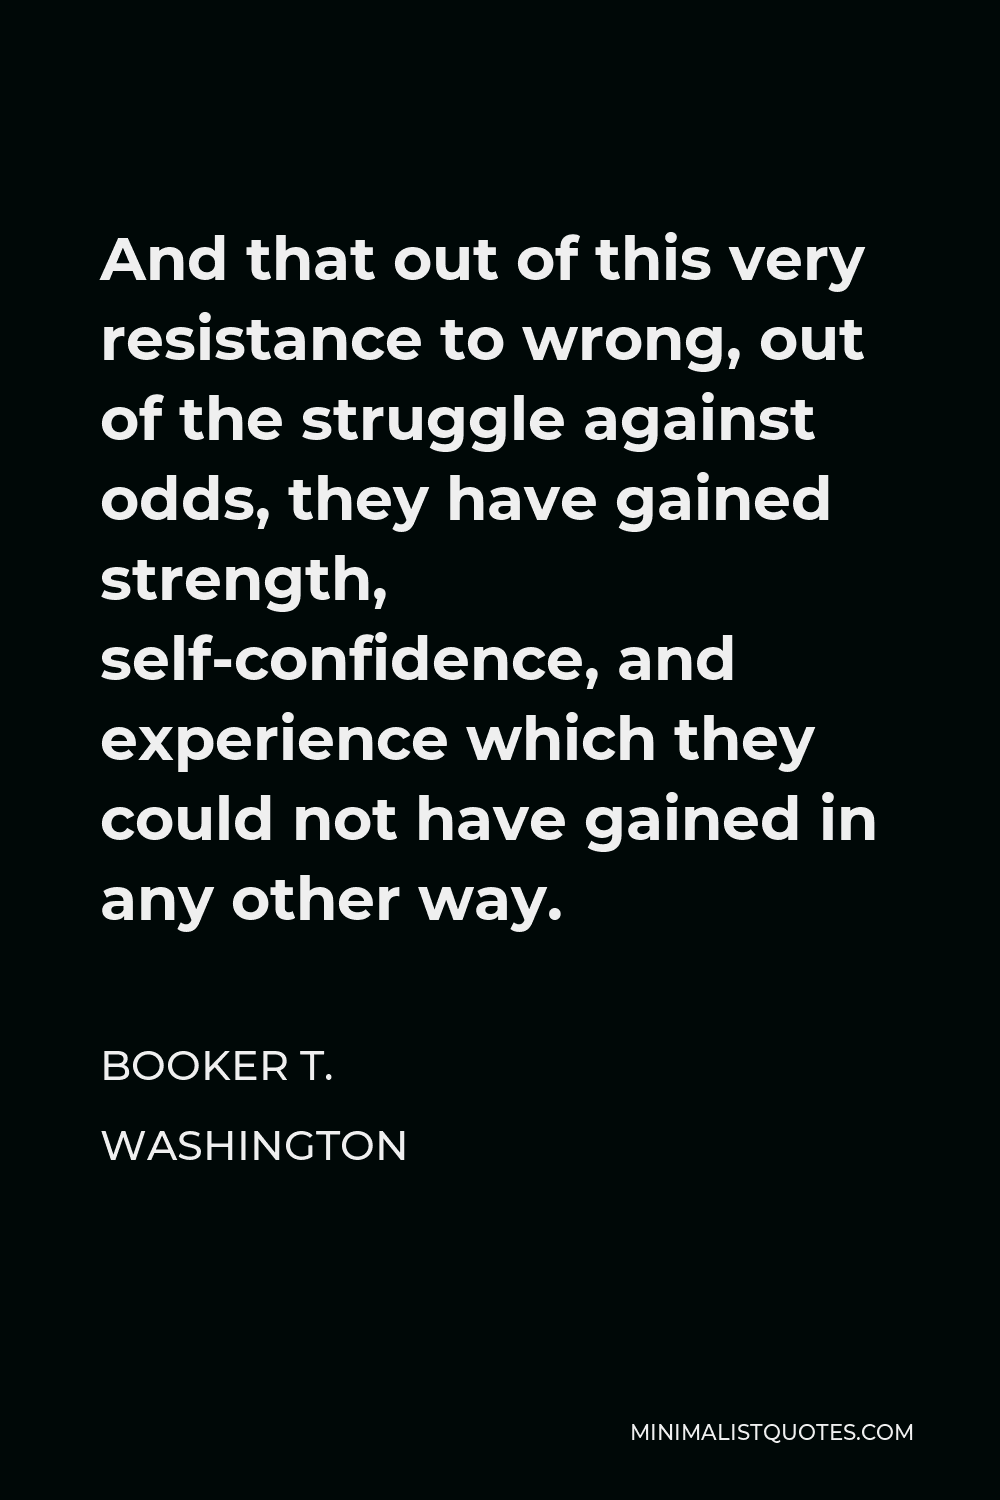 Booker T. Washington Quote - And that out of this very resistance to wrong, out of the struggle against odds, they have gained strength, self-confidence, and experience which they could not have gained in any other way.